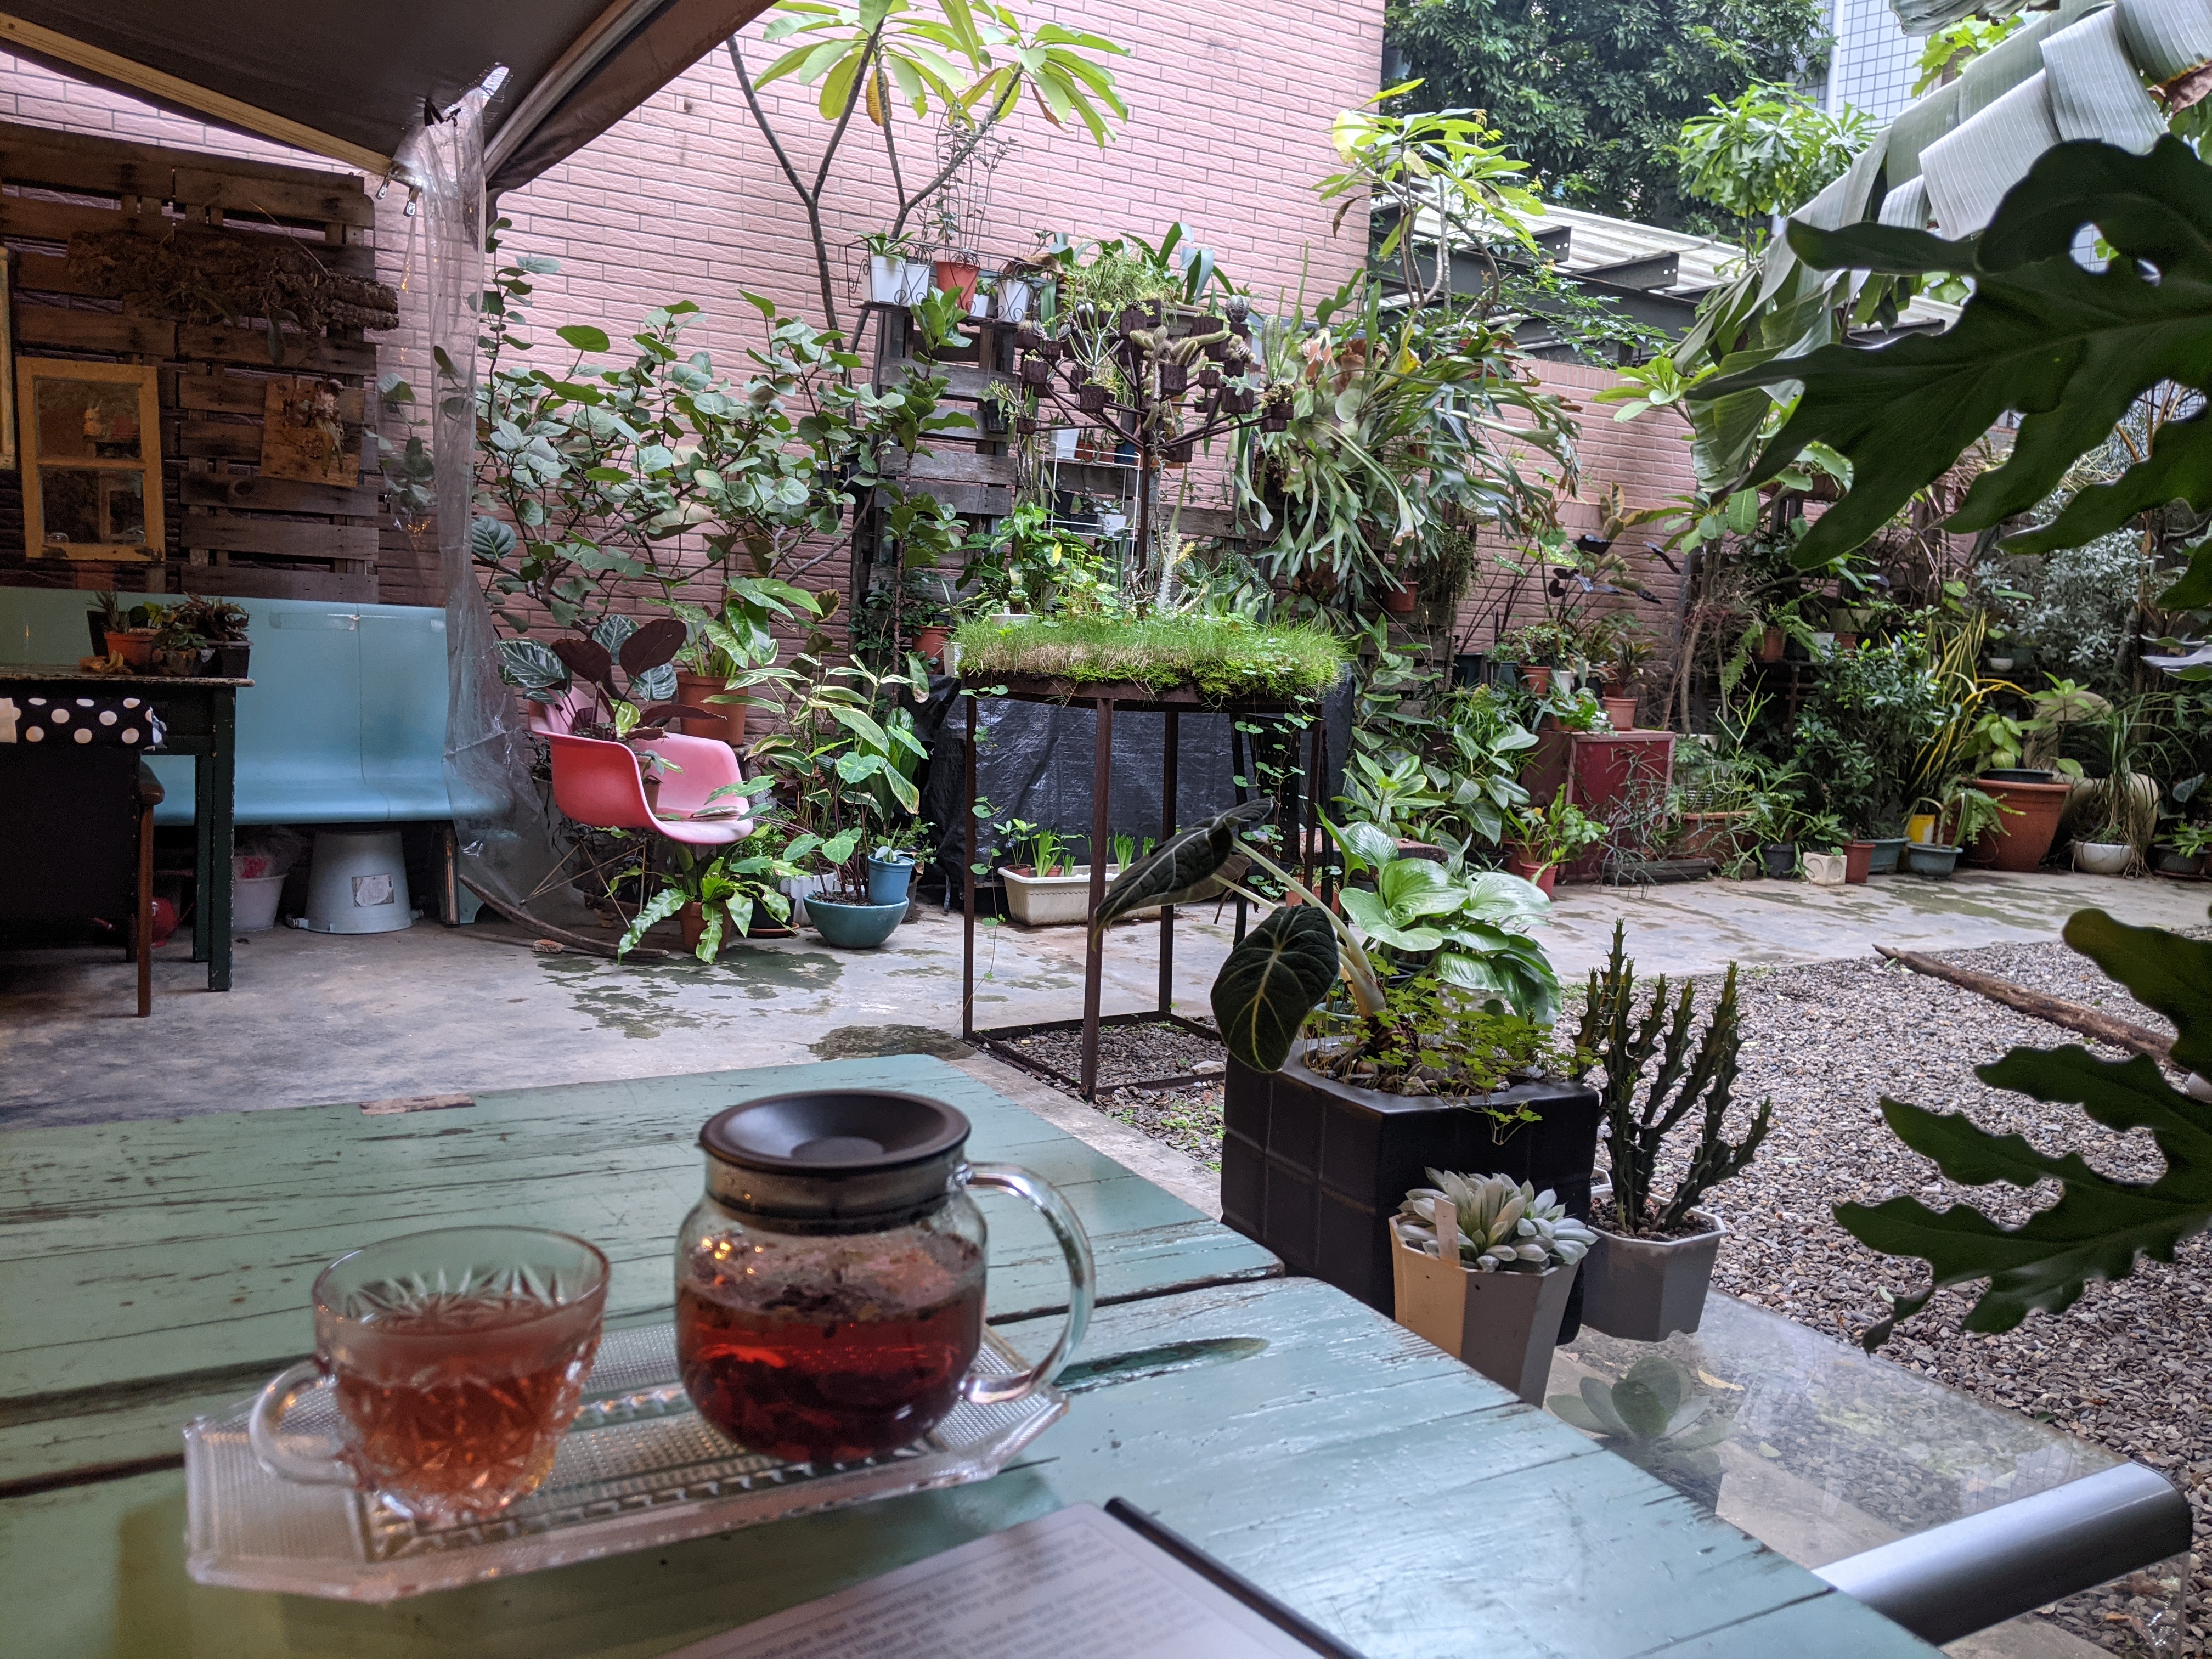 A pot of tea on a table in an outdoor patio with some plants.